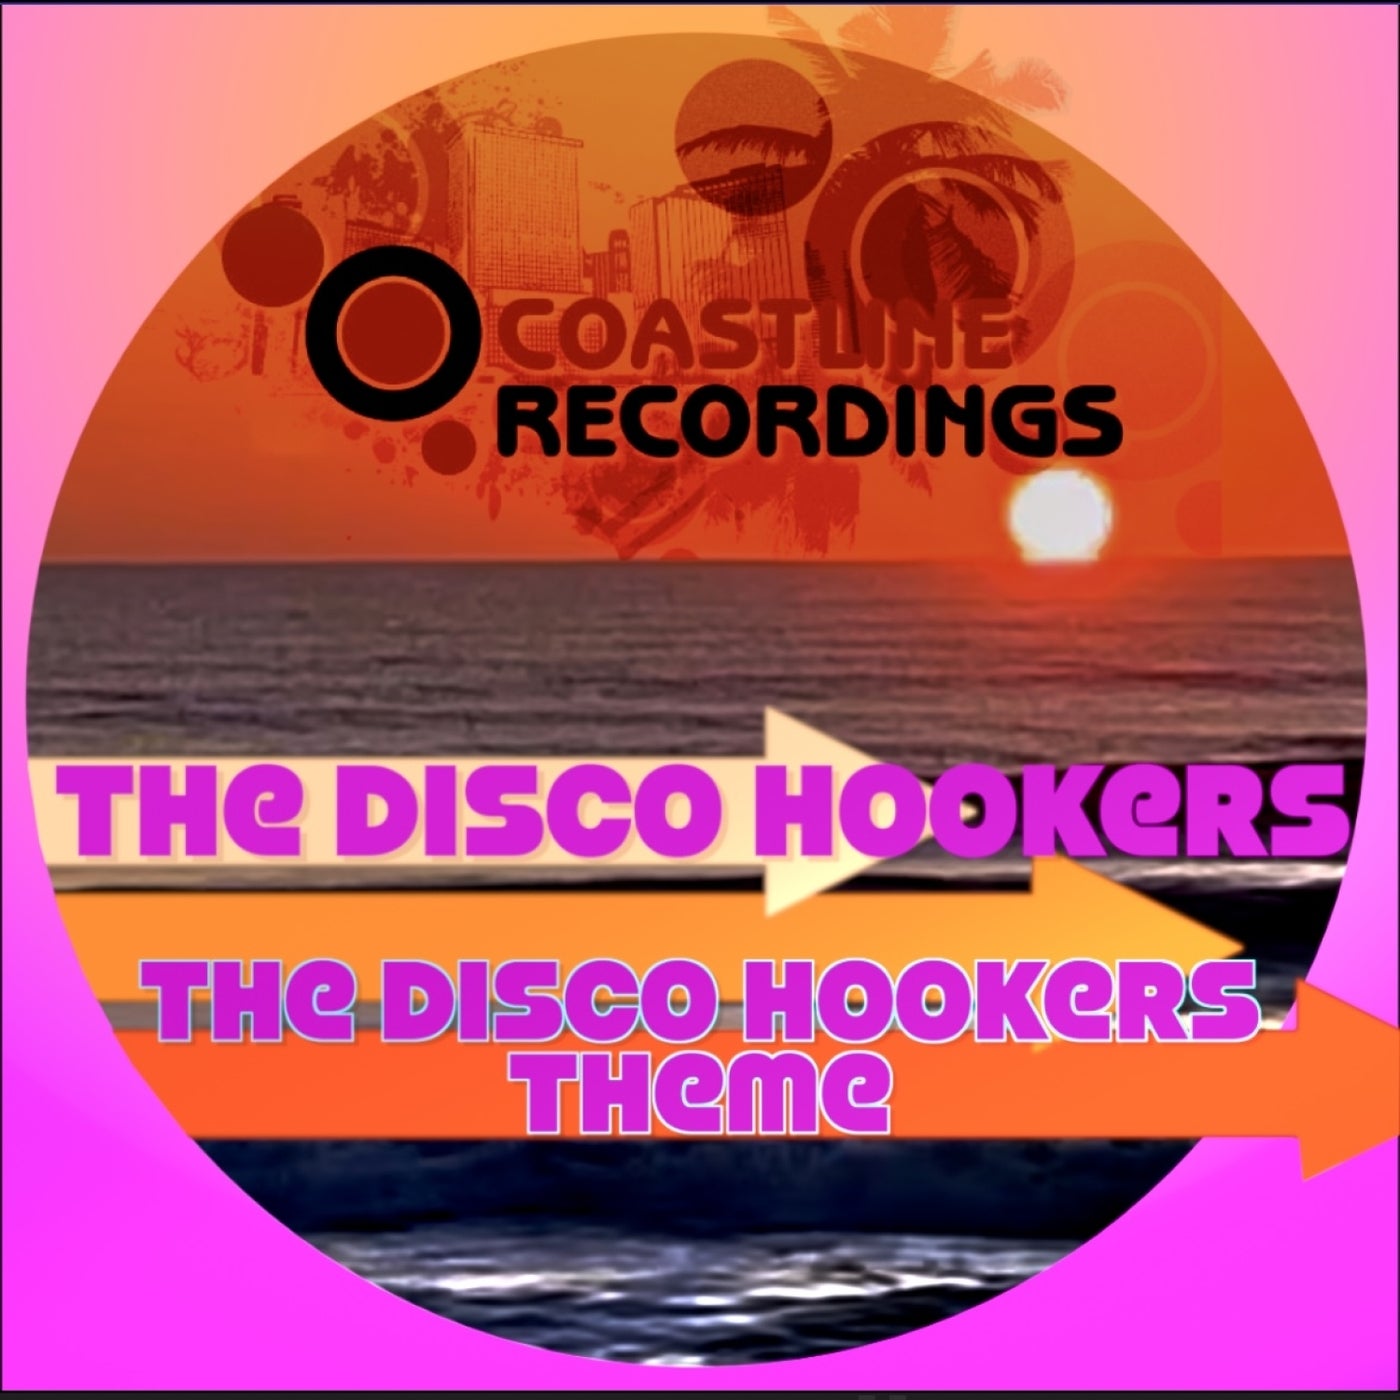 The Disco Hookers Theme